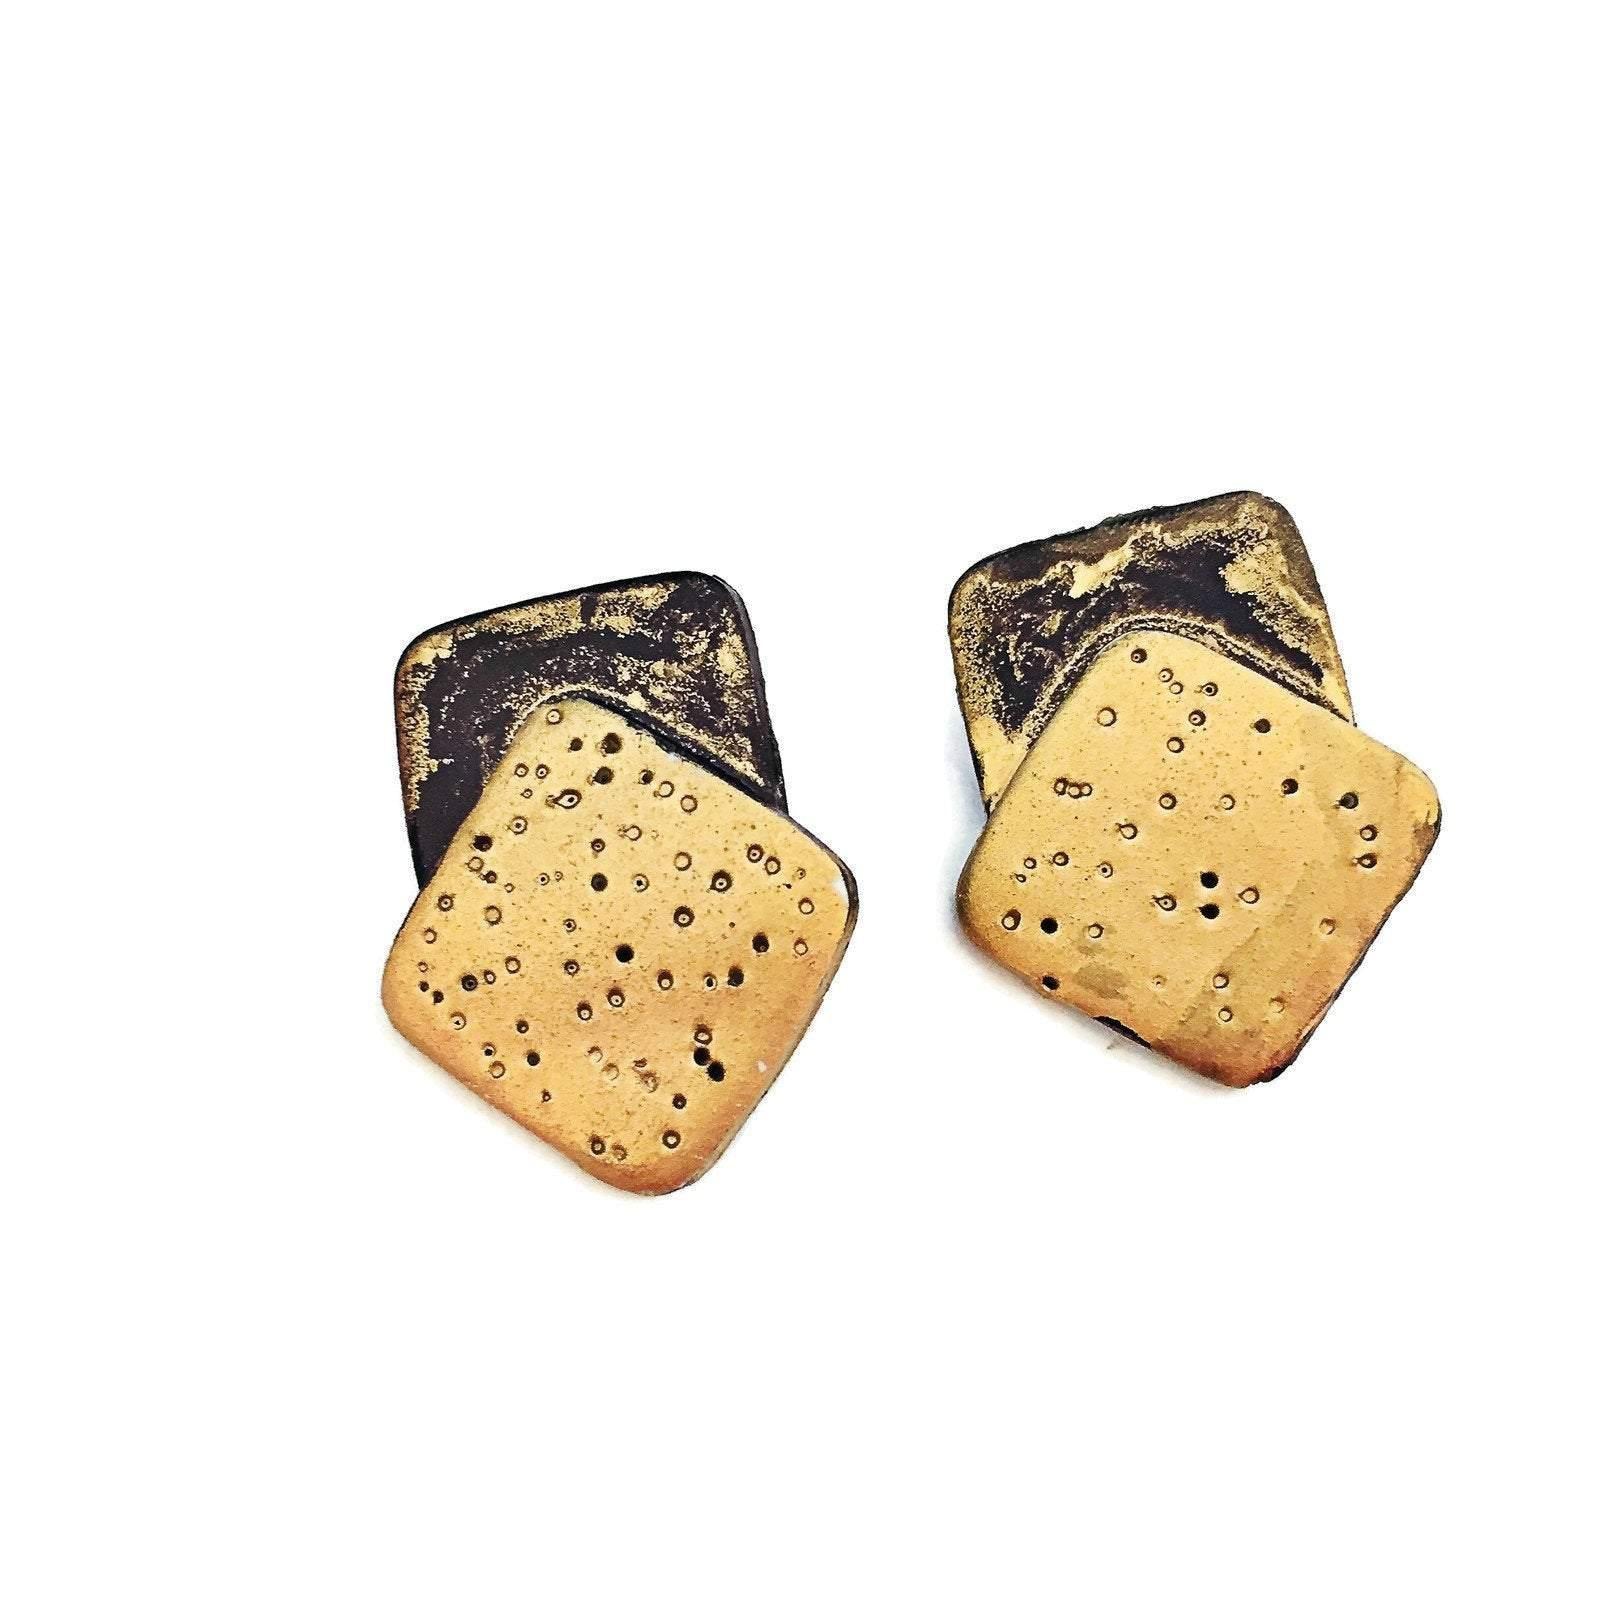 Geometric Statement Earrings Black & Gold. Polymer Clay Earrings Painted with Alcohol ink. Minimalist Elegant Clip Ons or Studs, Sister Gift - Sassy Sacha Jewelry